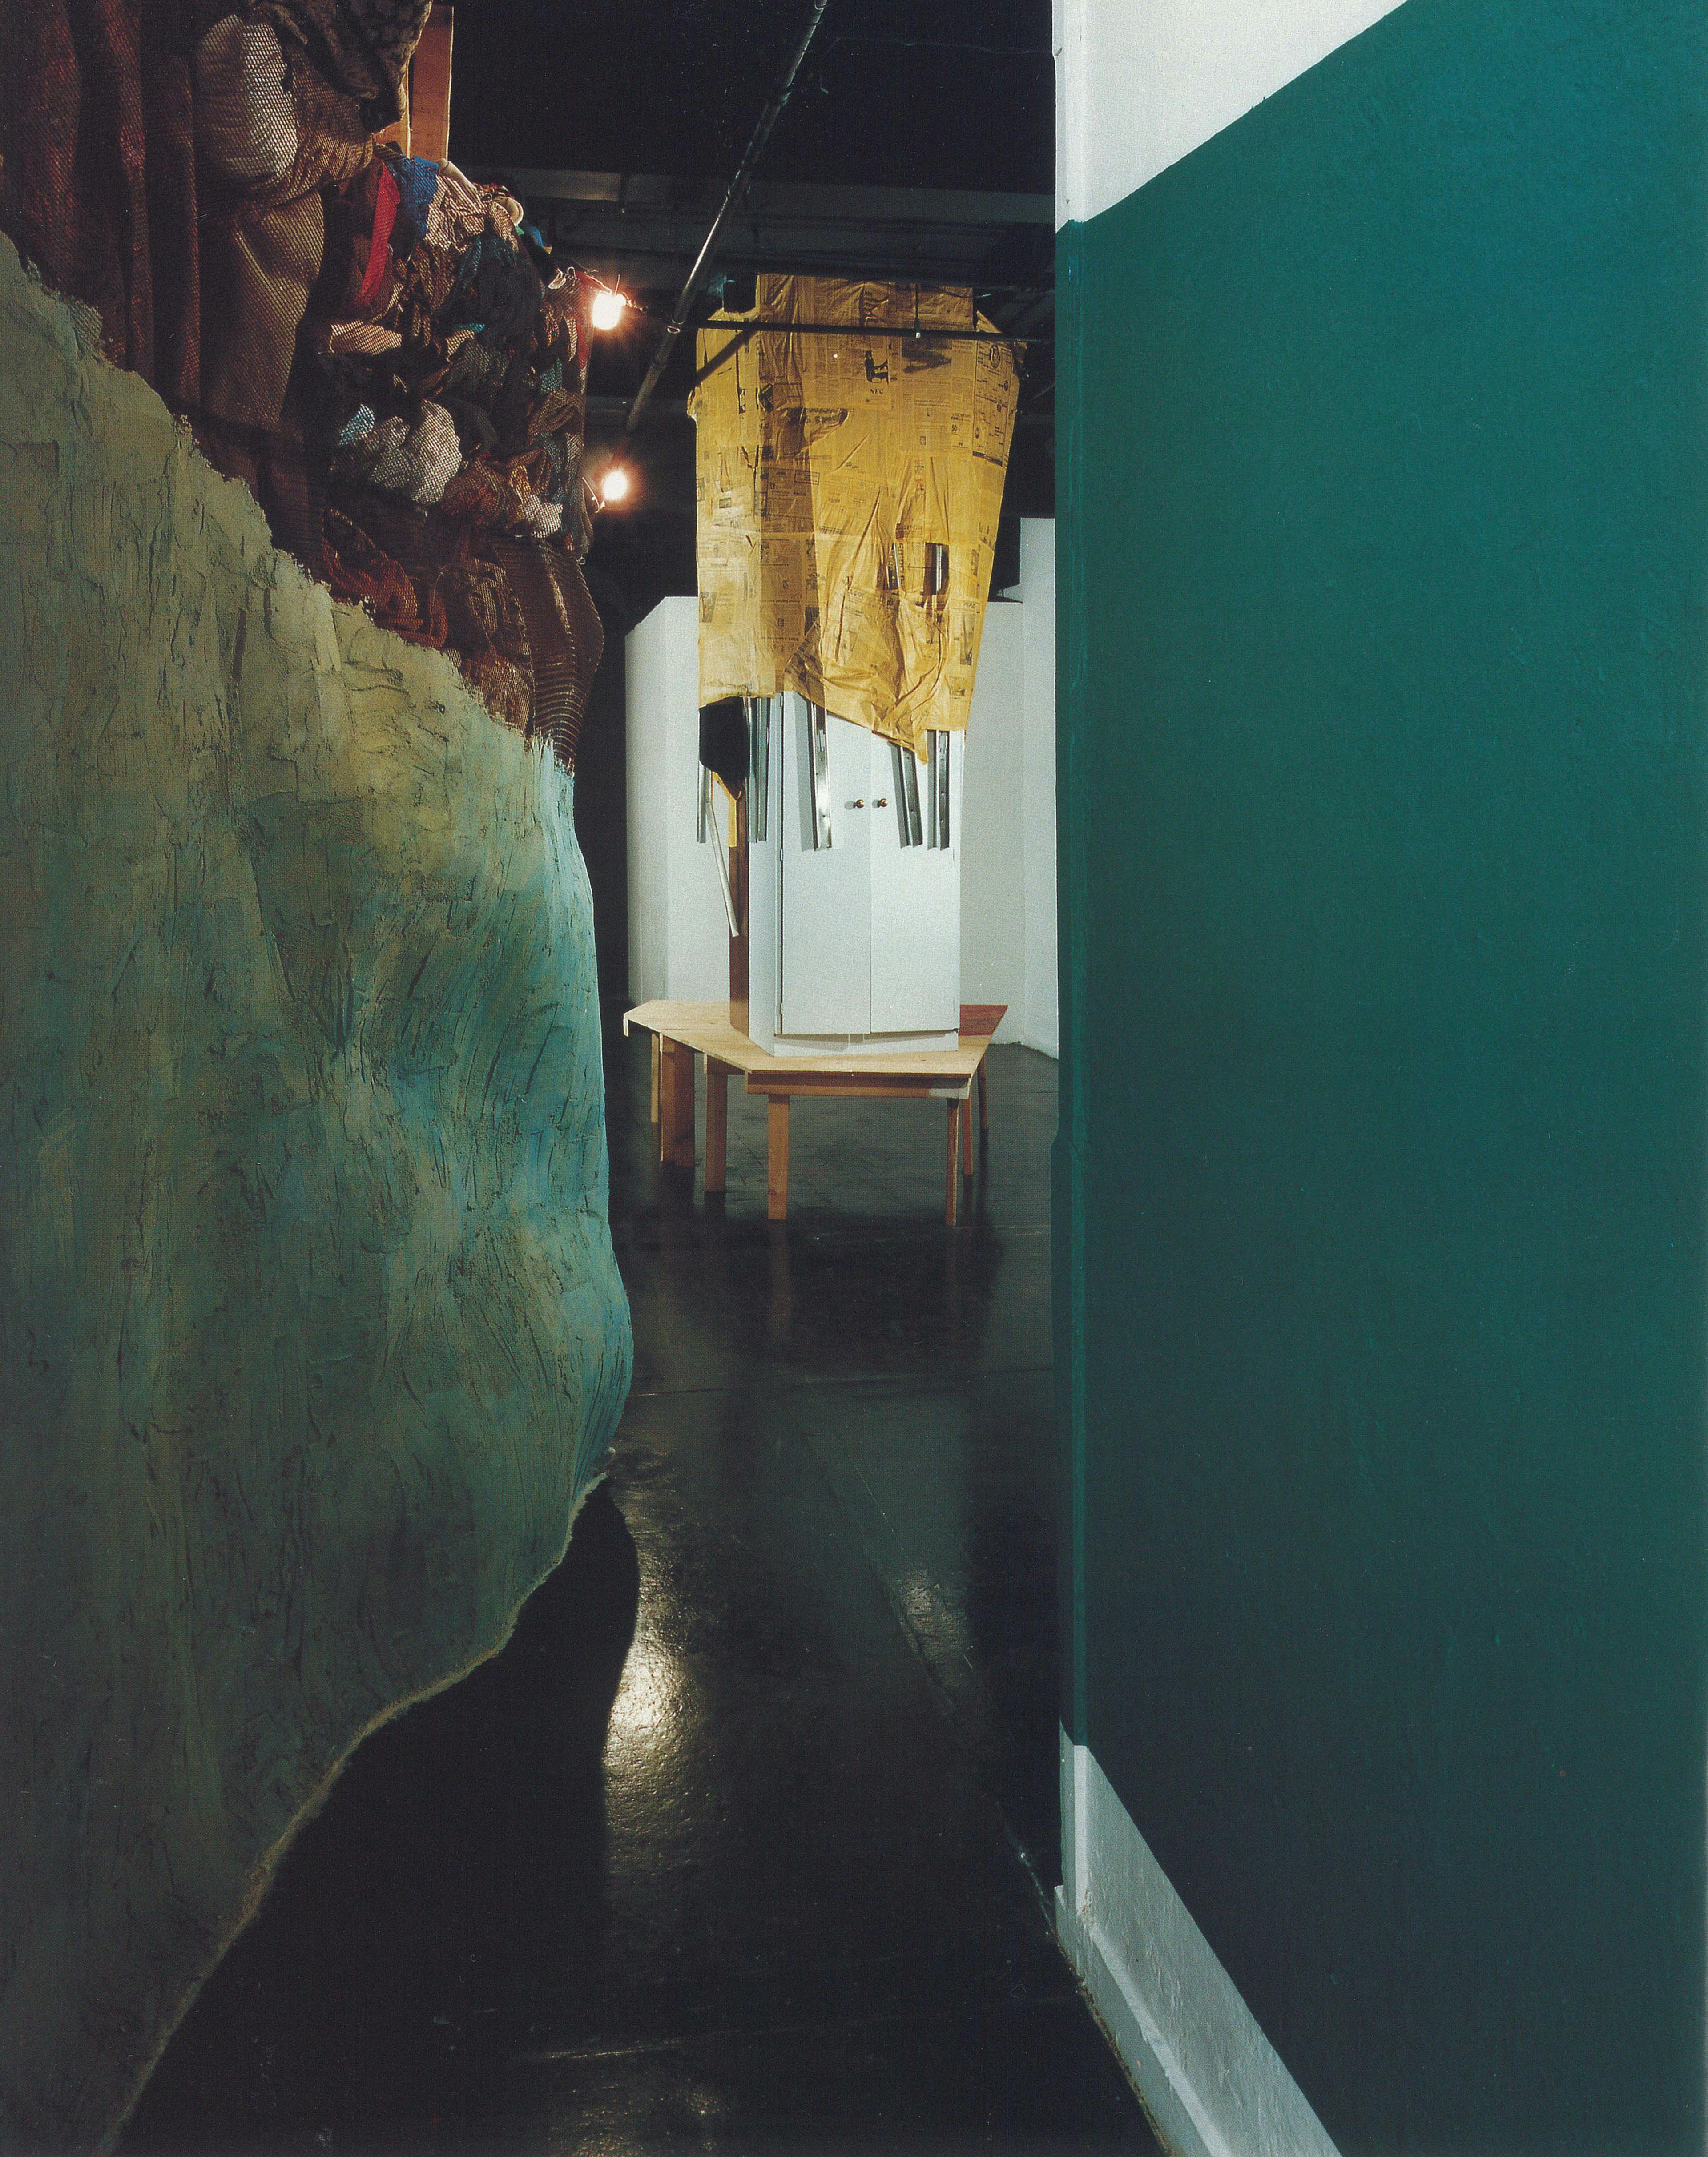 In a gallery space, two green painted walls lead to a space where a pentagonal-shaped wooden table sits. A white closet is placed on top of the table. The closet is half-covered by old newspapers.